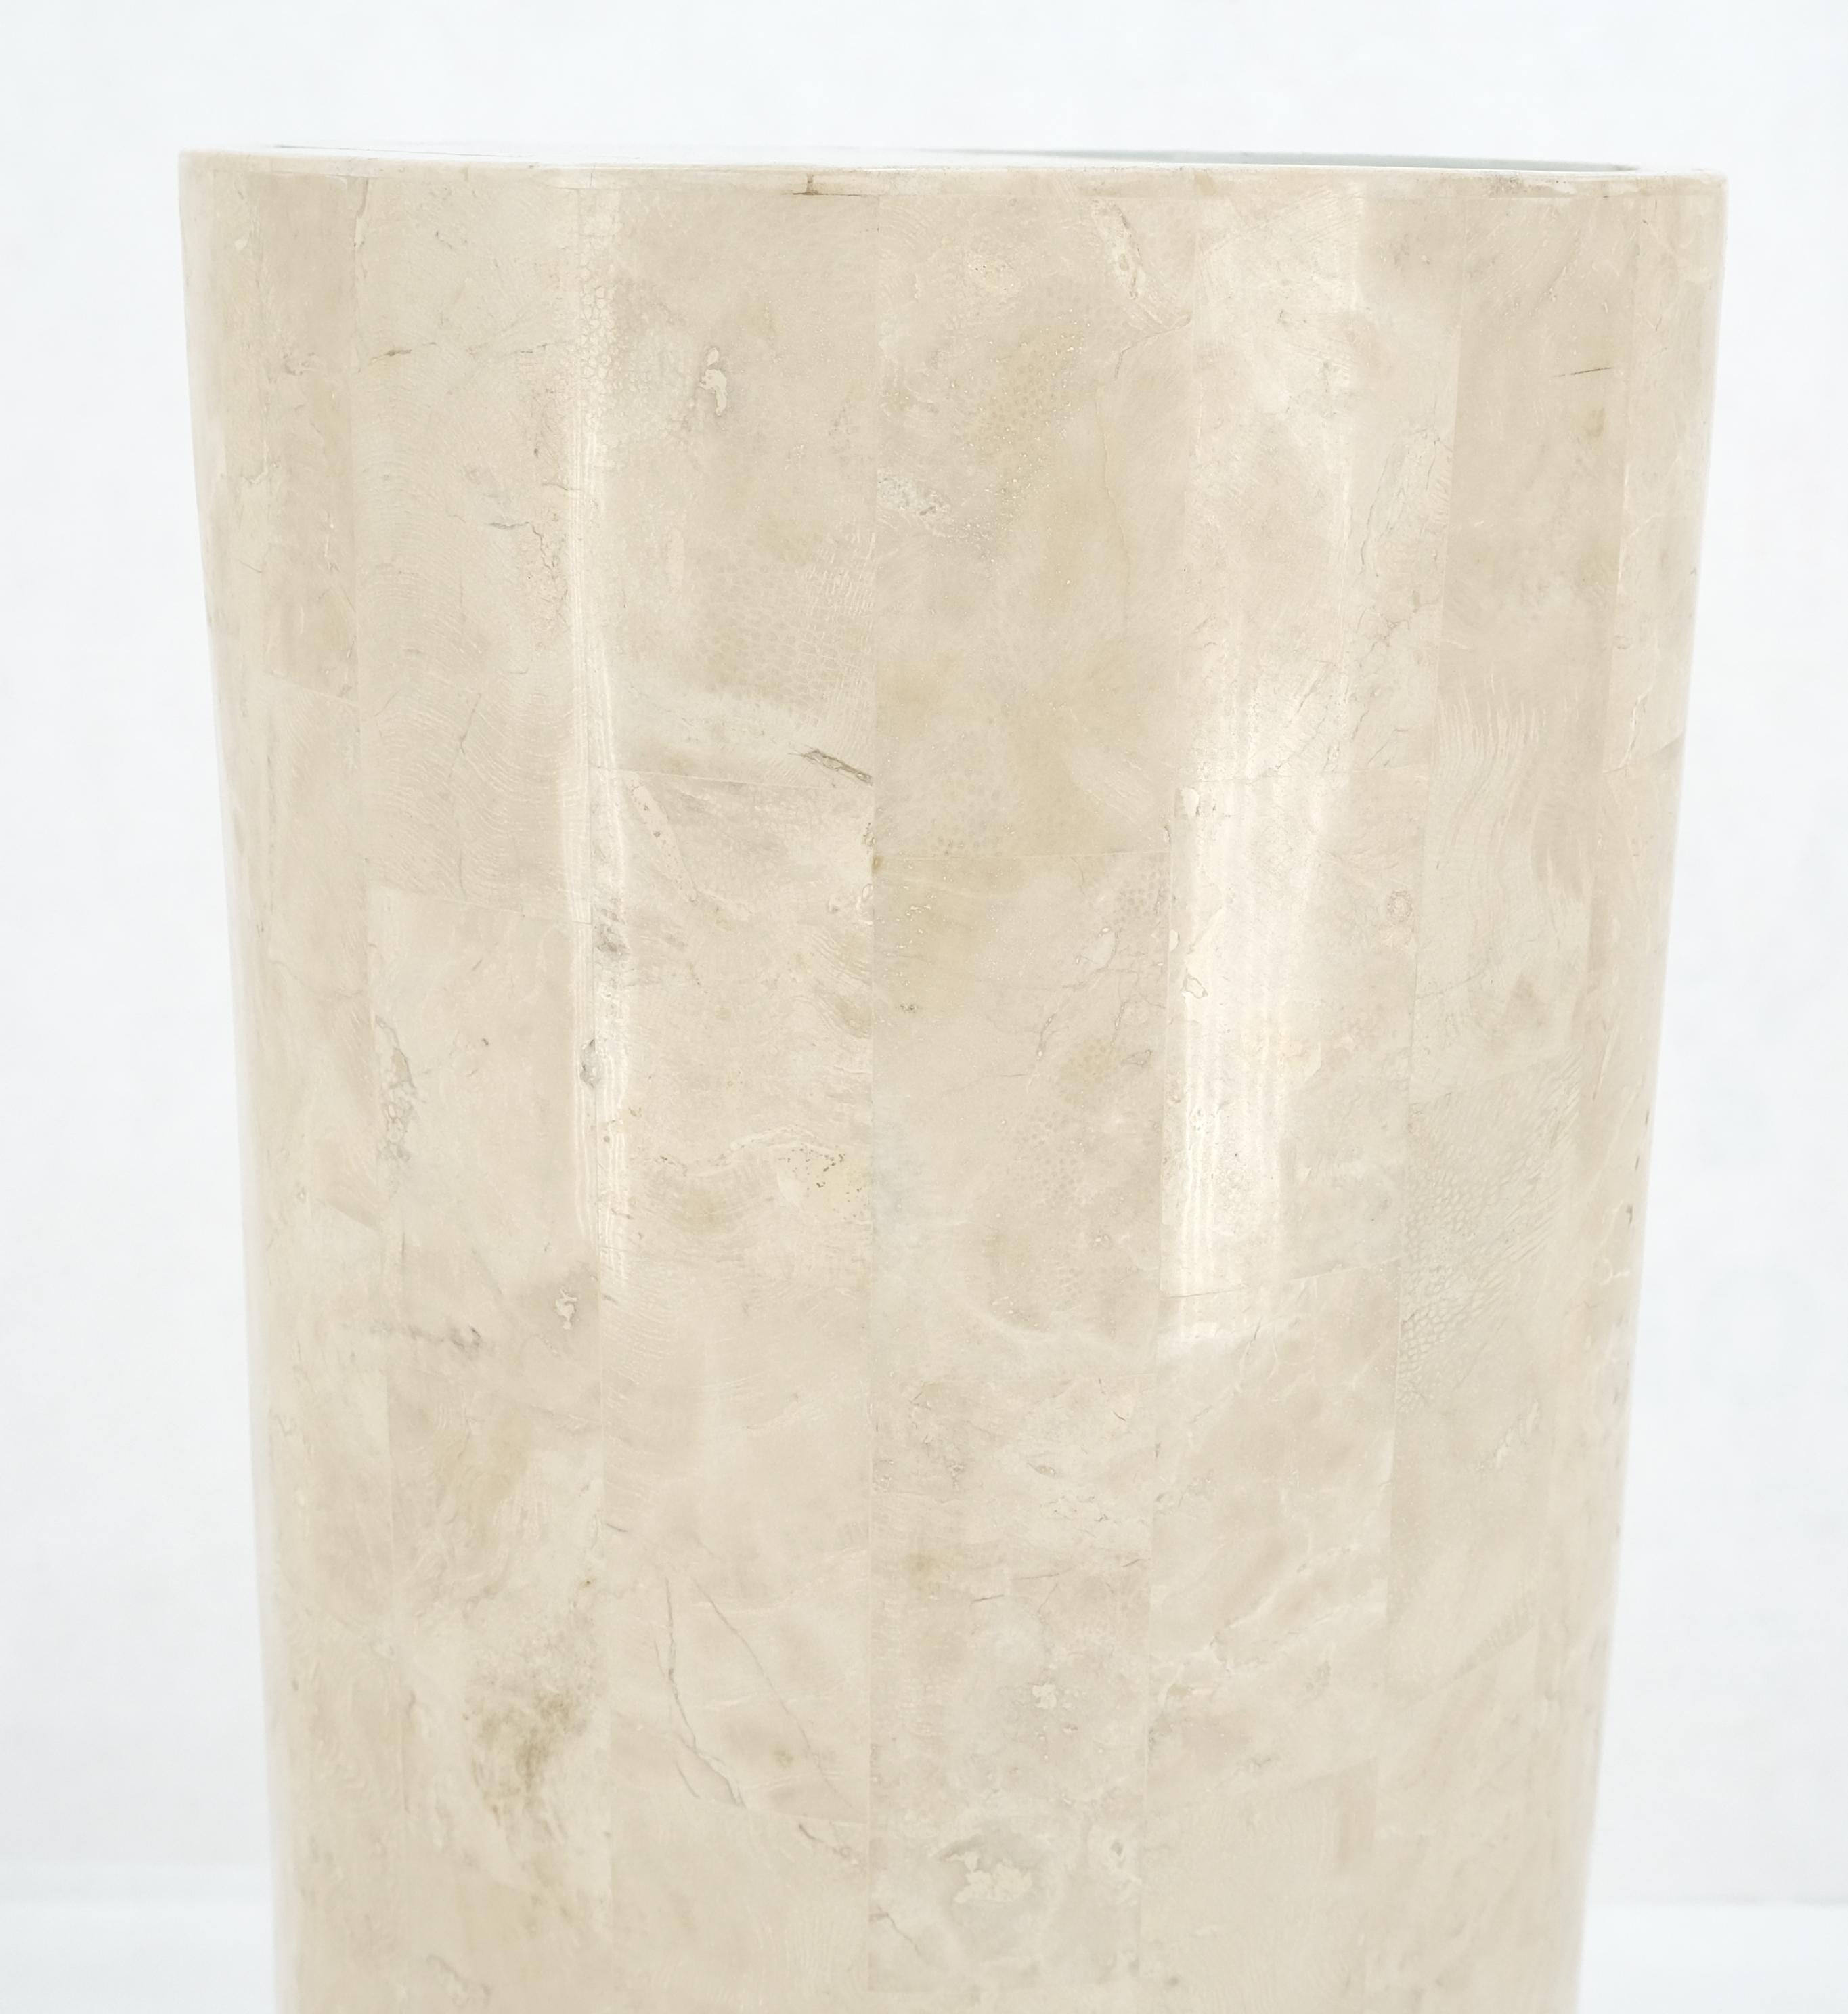 Turning Top Lighted Electrified Tessellated Marble Round Pedestal Stand MINT! im Zustand „Gut“ im Angebot in Rockaway, NJ